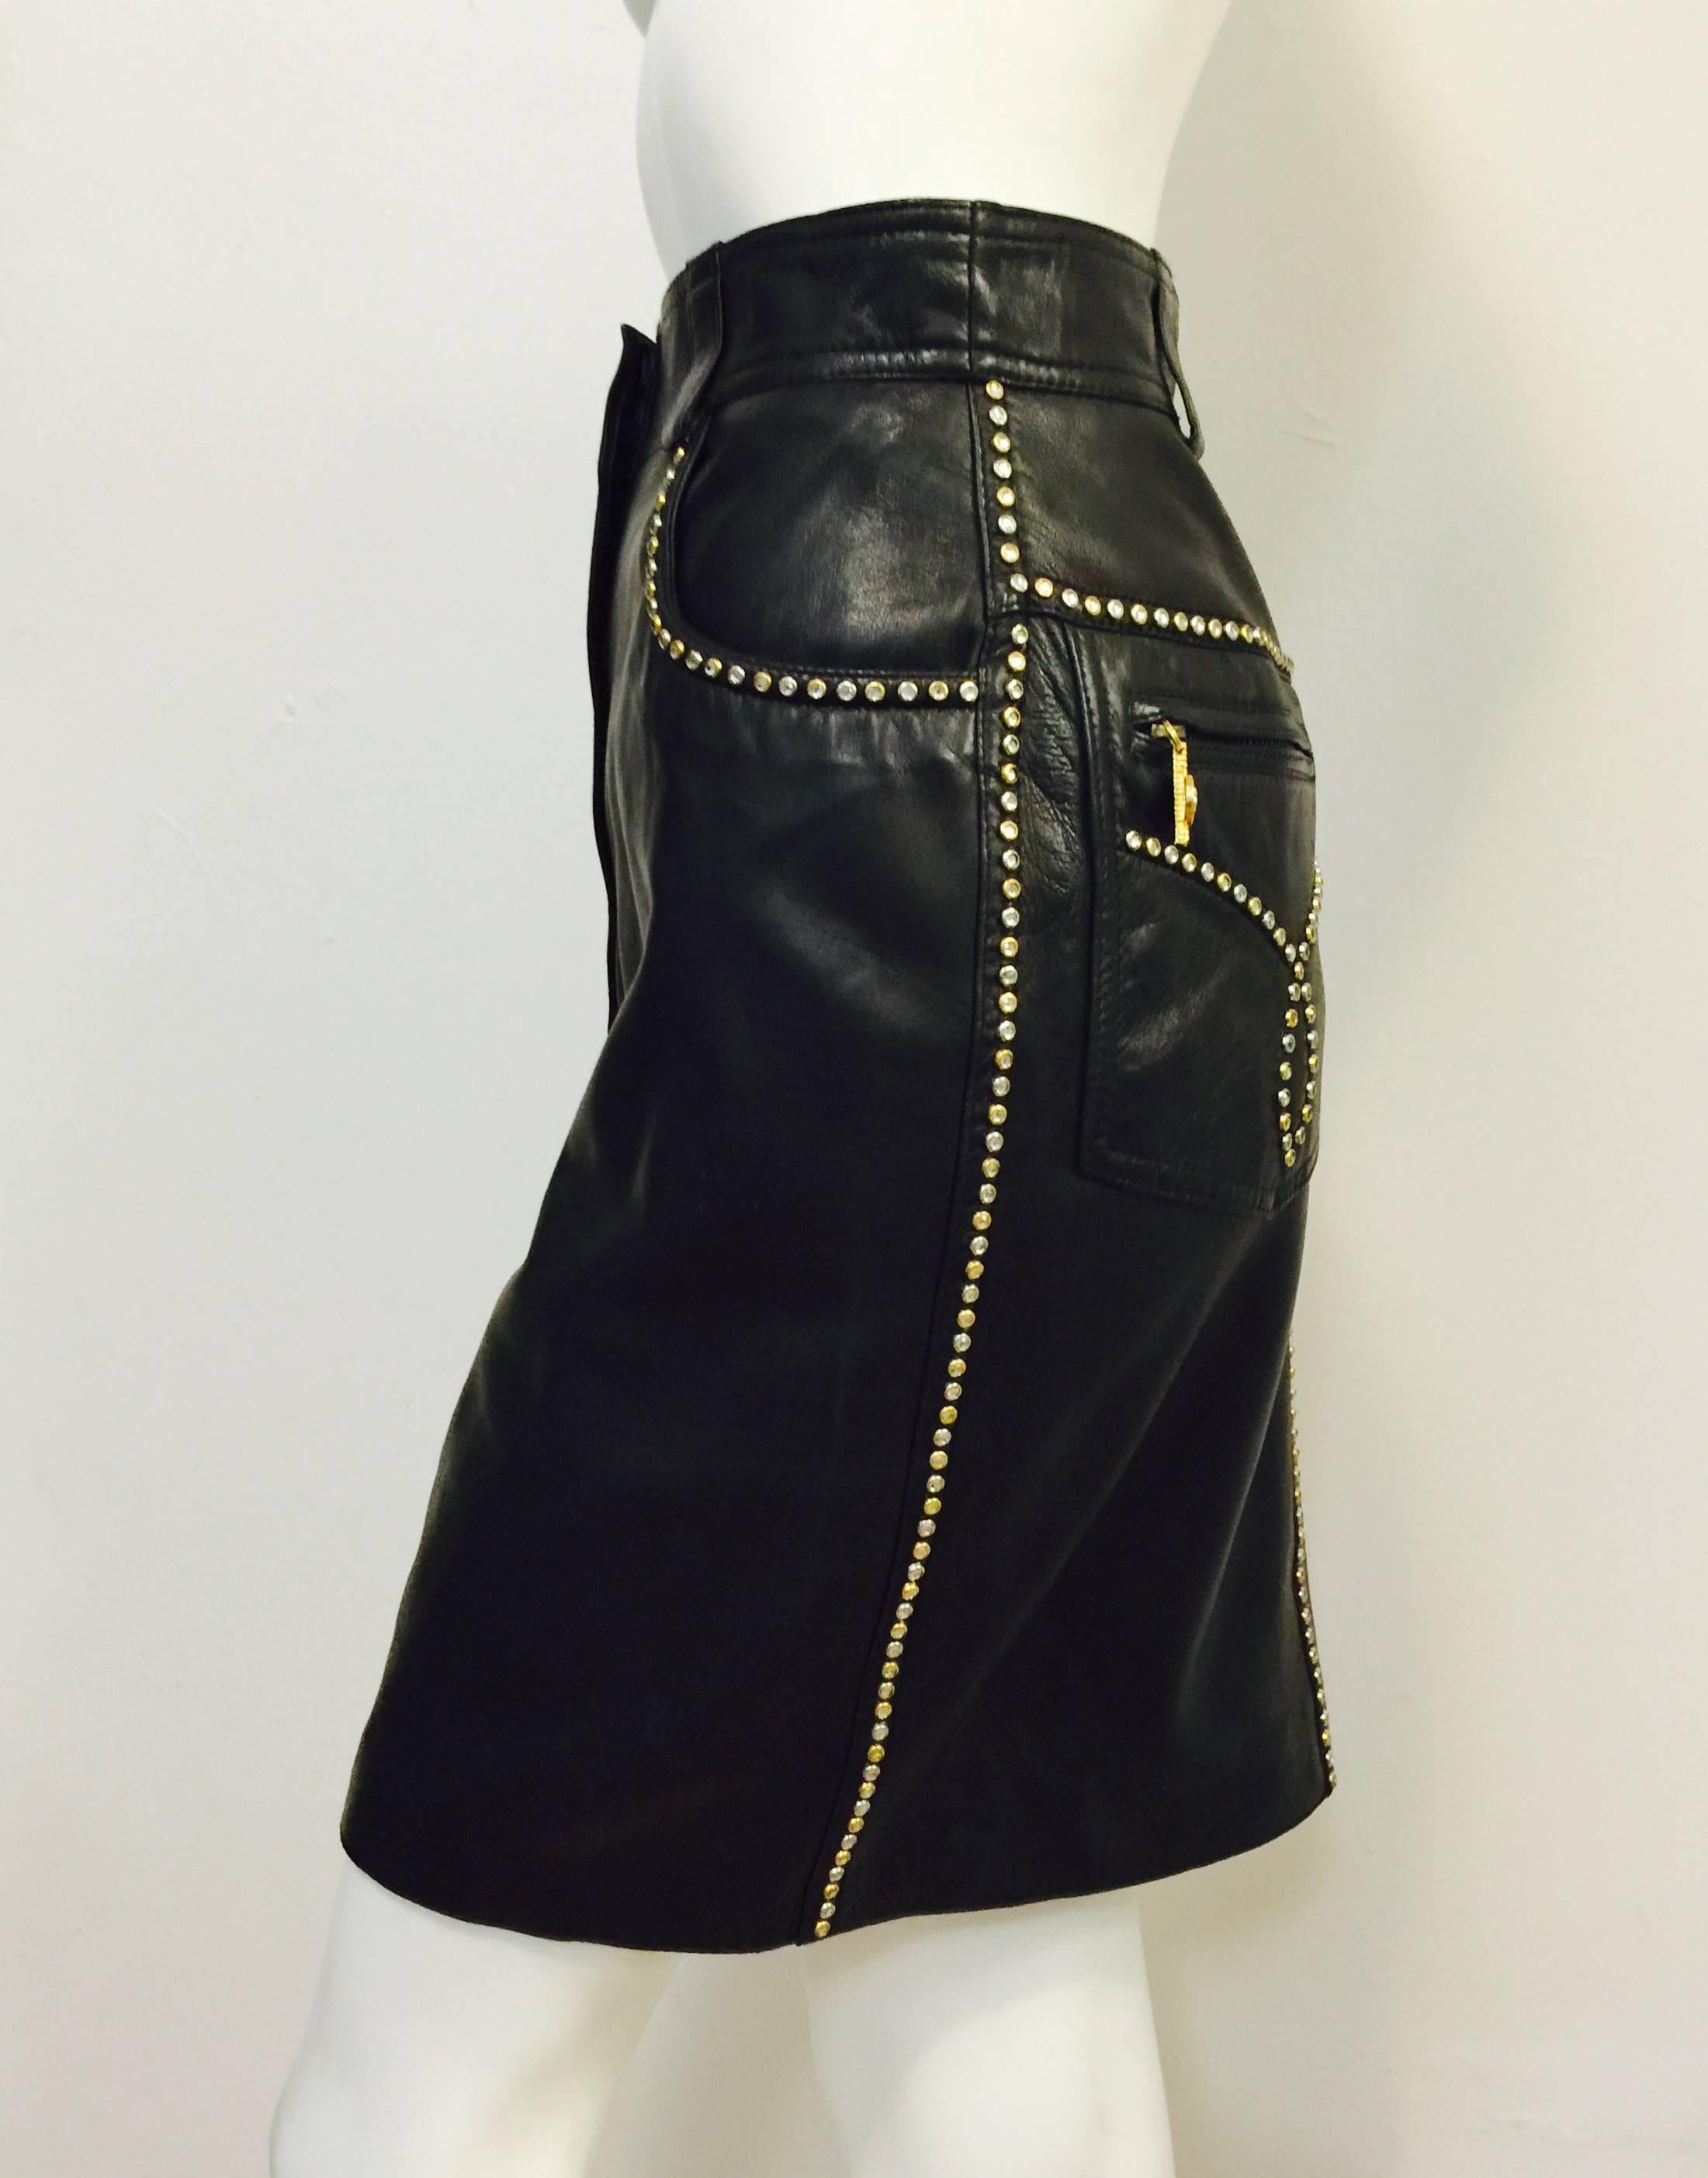 1990s Versace Studded Lambskin Straight Skirt is quintessential Gianni!  Features ultra-luxurious leather and styling that takes cues from 5-pocket denim jeans.  Zippered welt rear pockets have crystal encrusted gold tone pulls.  4 belt loop banded